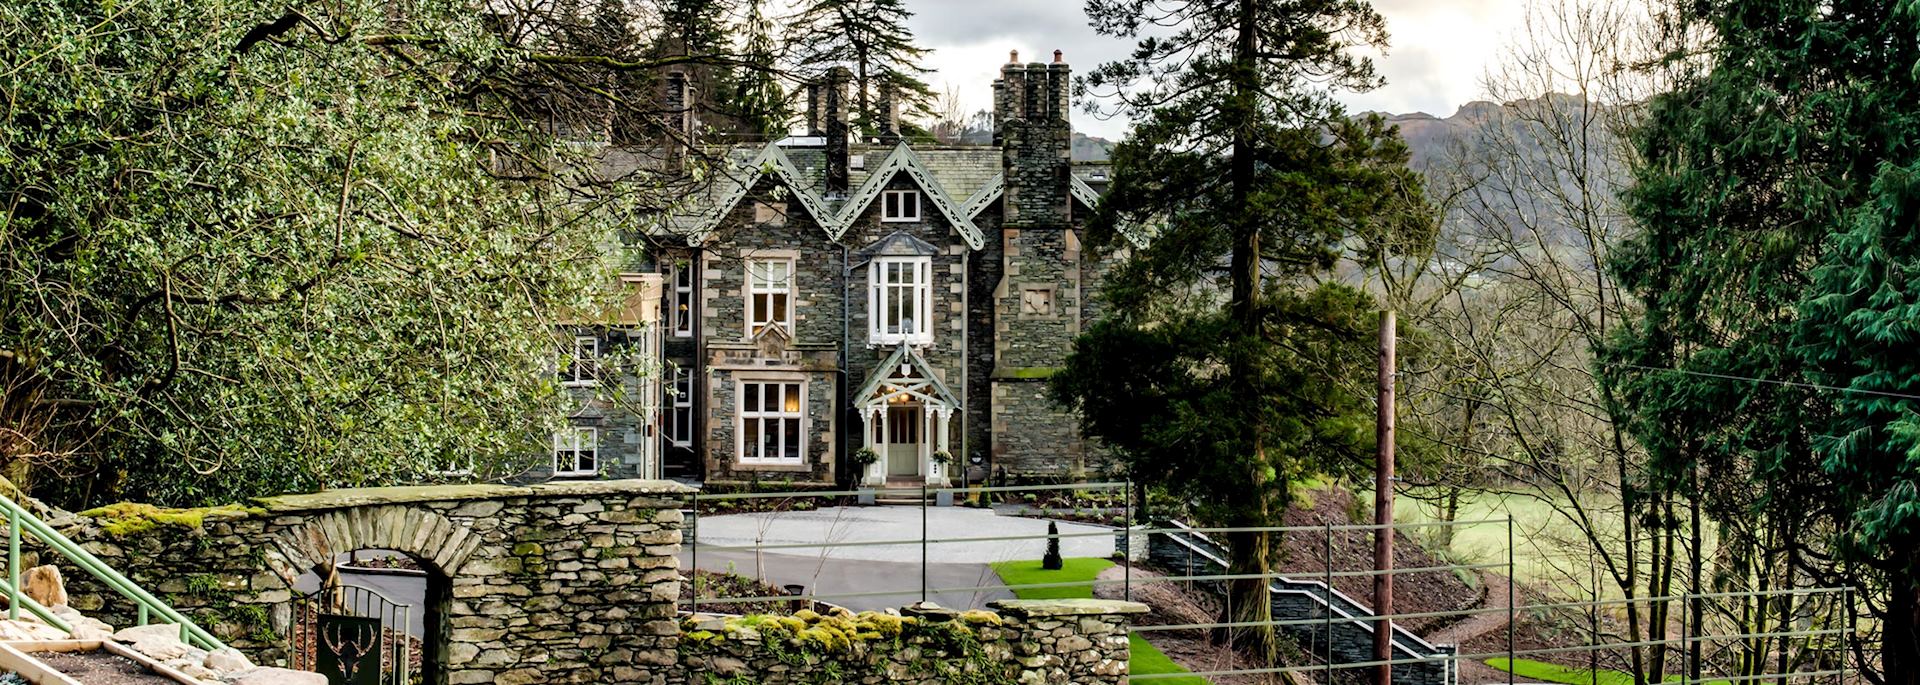 The Forest Side Hotel, the Lake District